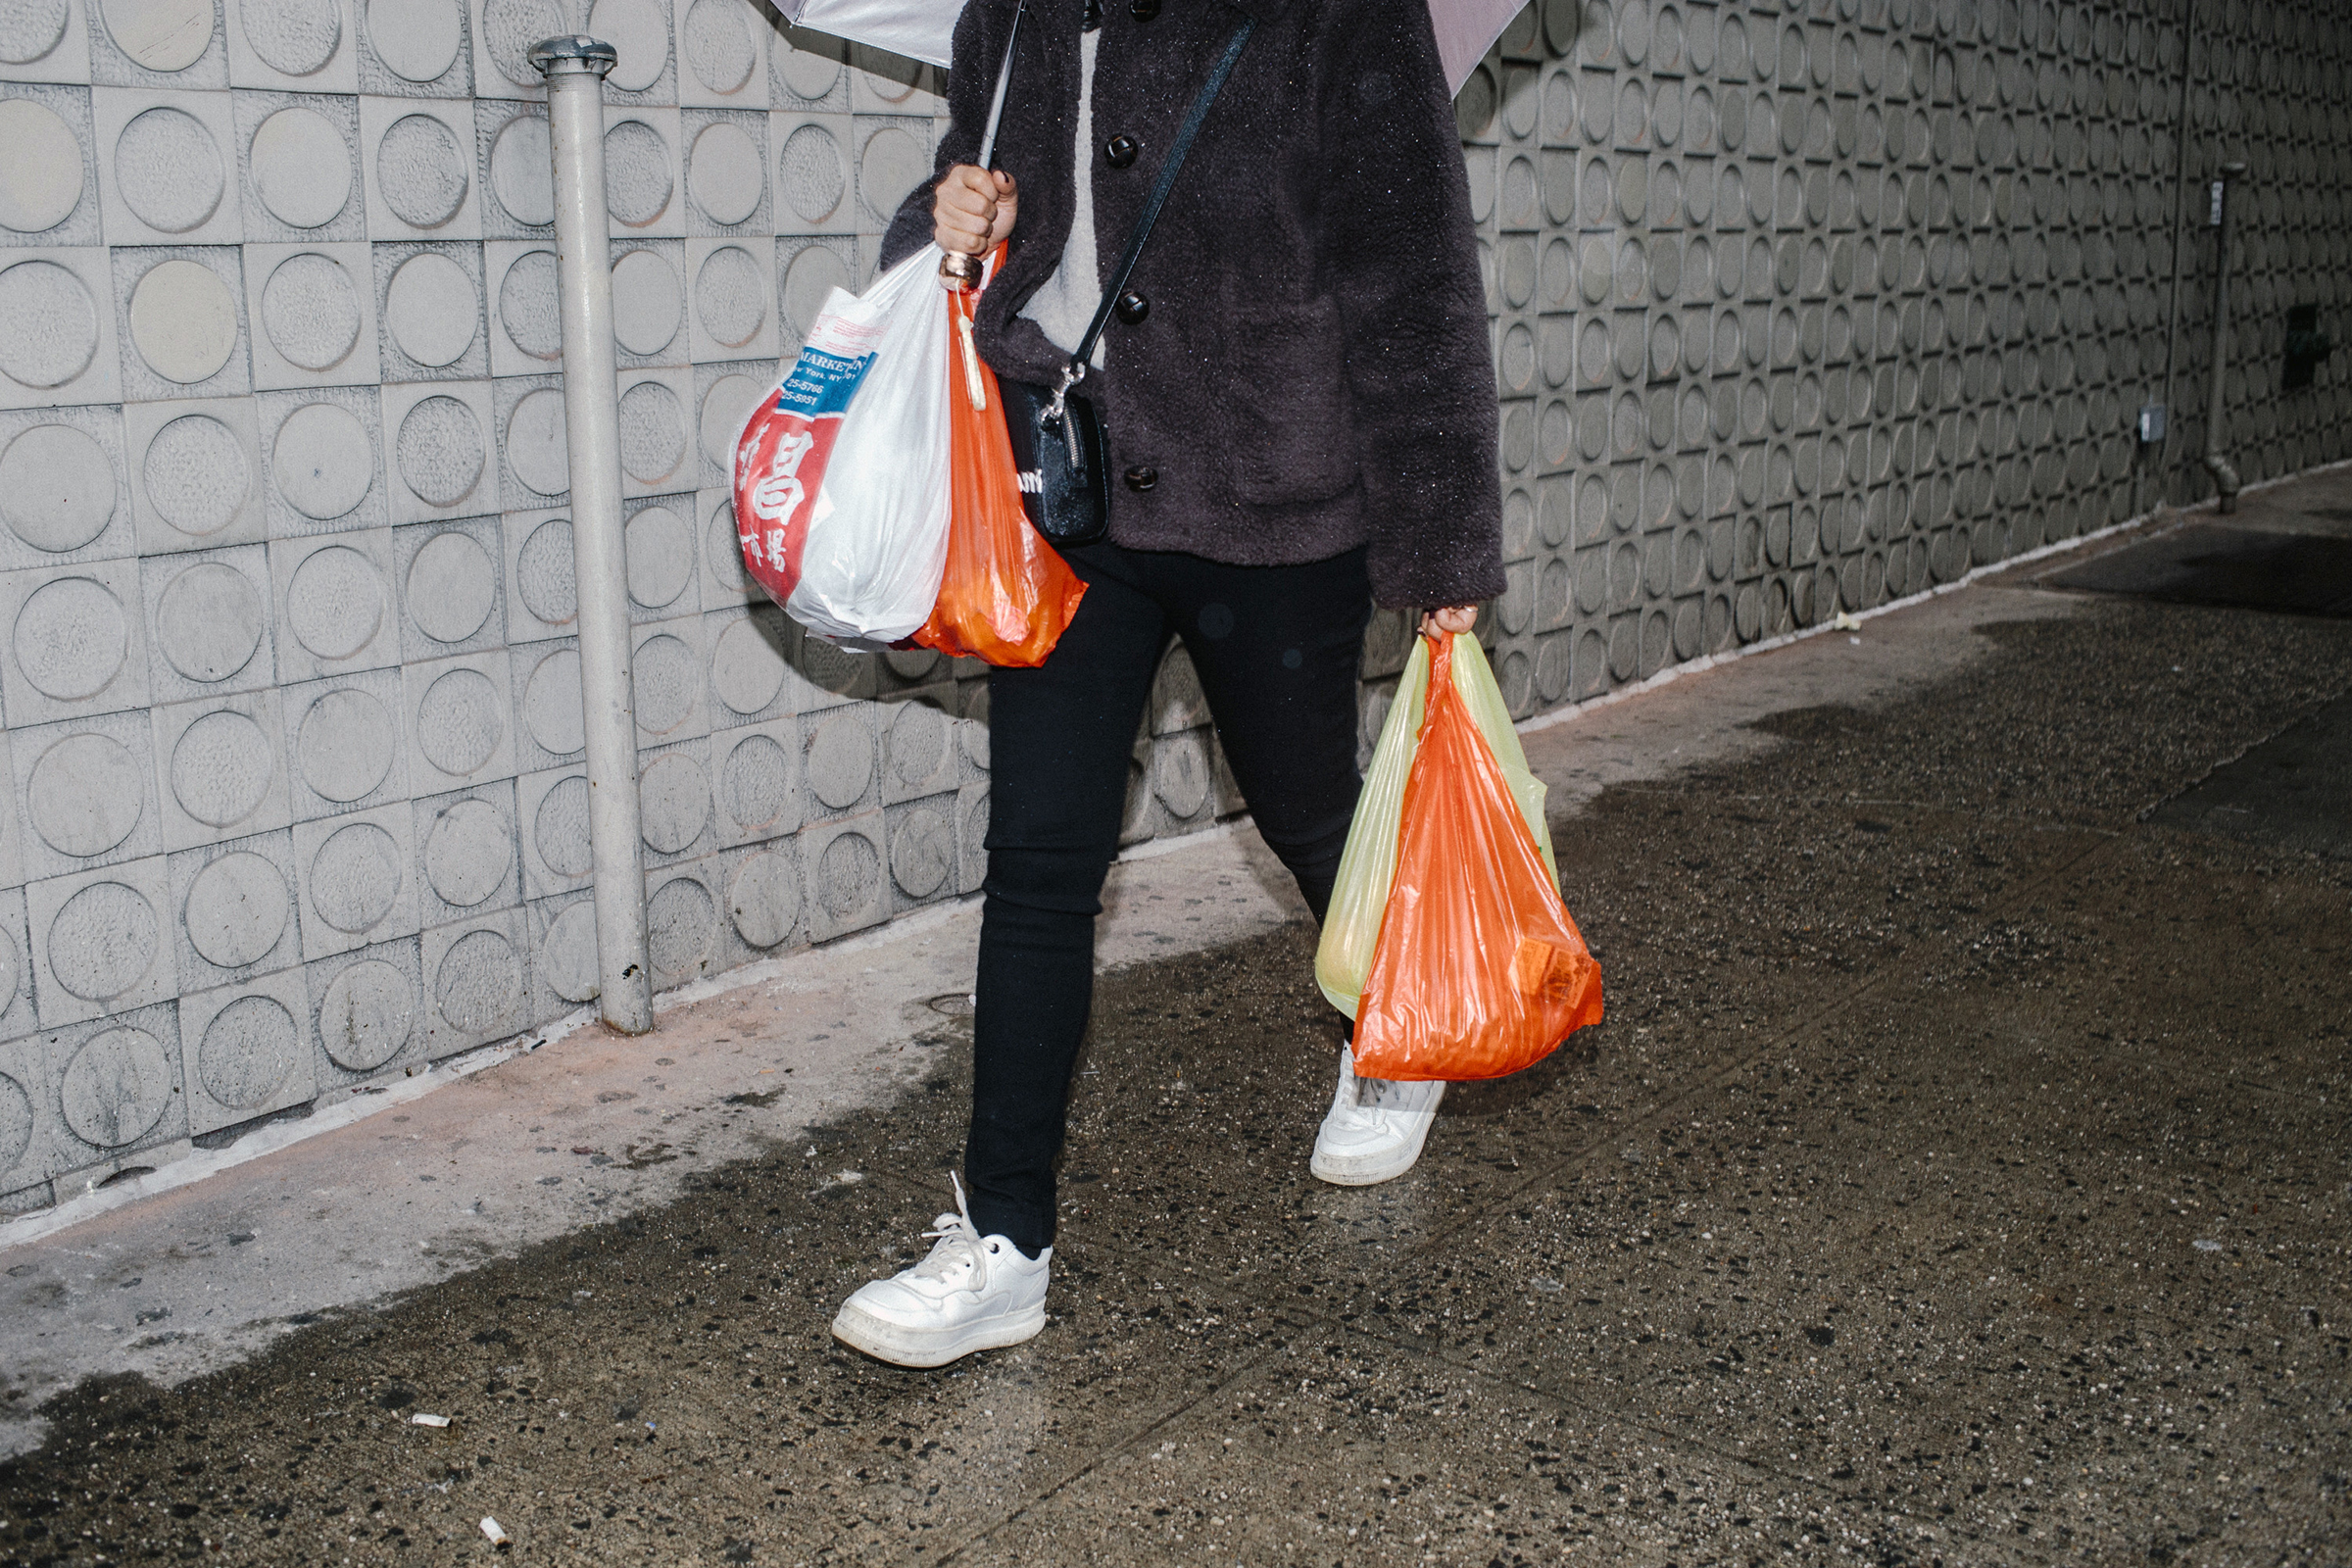 A woman carries plastic bags in New York on Feb. 25, 2020. (Mark Abramson/The New York Times)